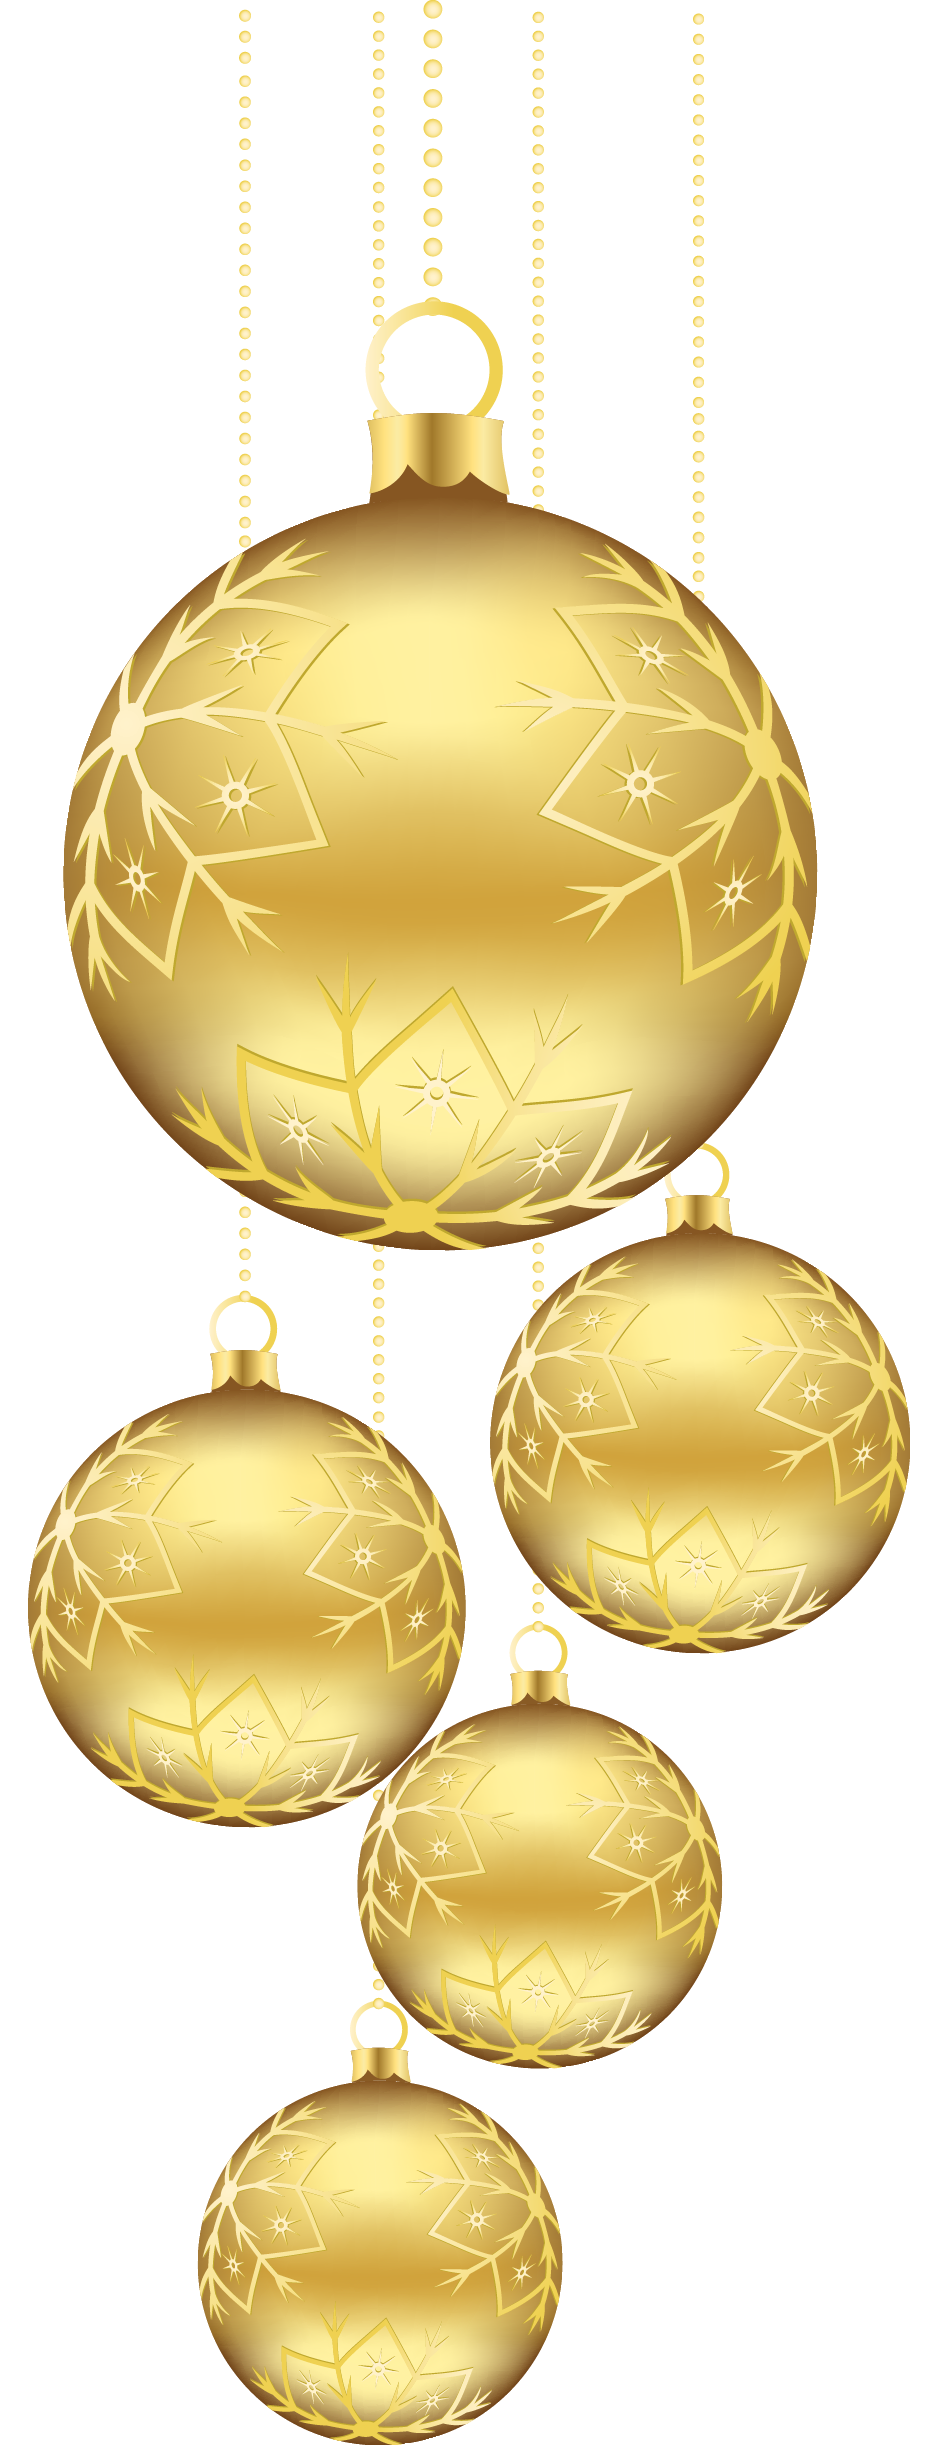 Christmas Golden Balls Ornaments PNG Picture  Gallery 